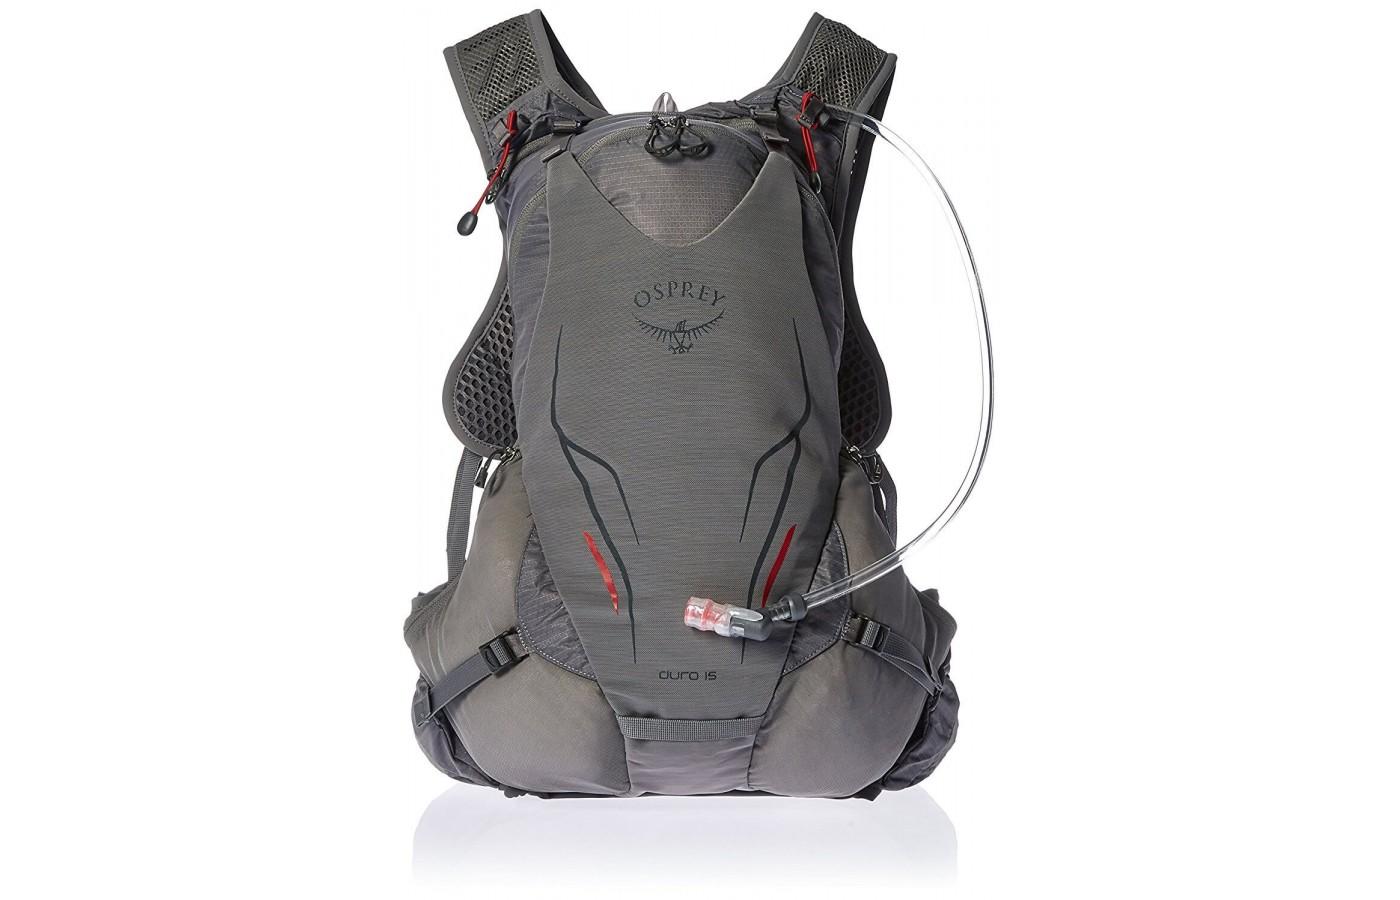 The Osprey Duro 15 features a separate hydration sleeve that fits a 2.5L reservoir (included)